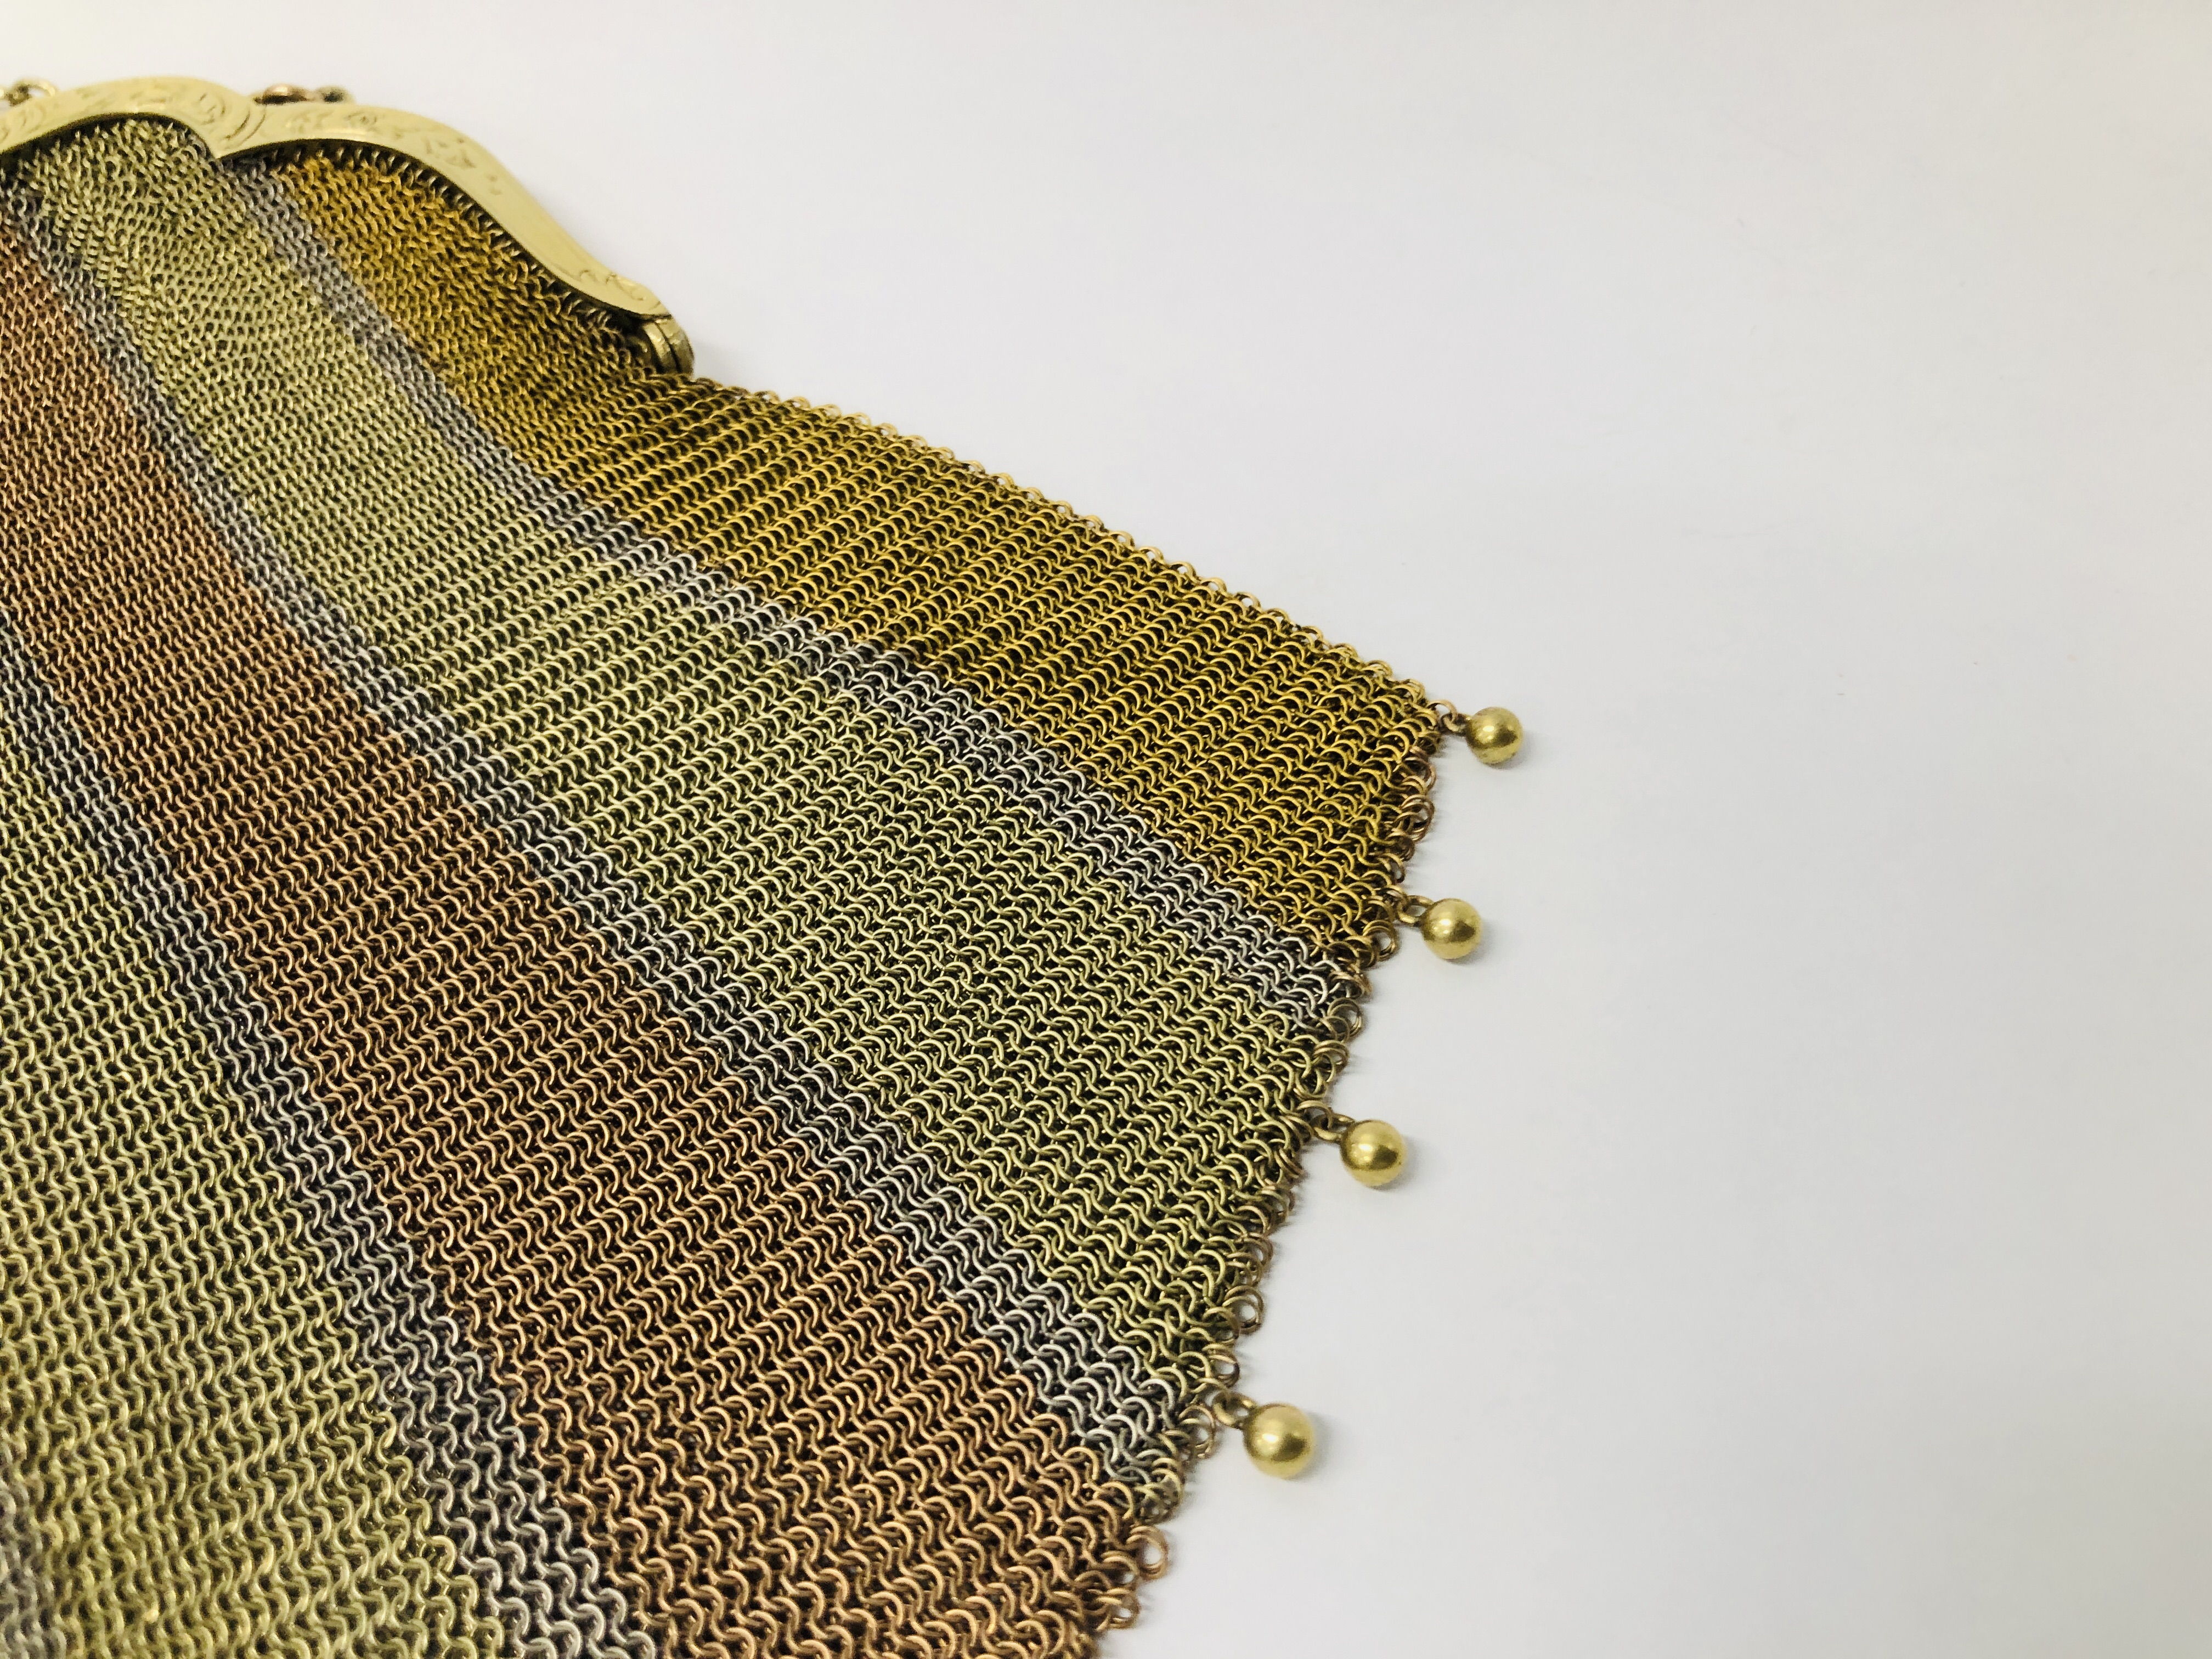 VINTAGE CHAIN MAIL PURSES YELLOW METAL TRI-COLOURED DESIGN (INDISTINCT MARKS). - Image 3 of 10